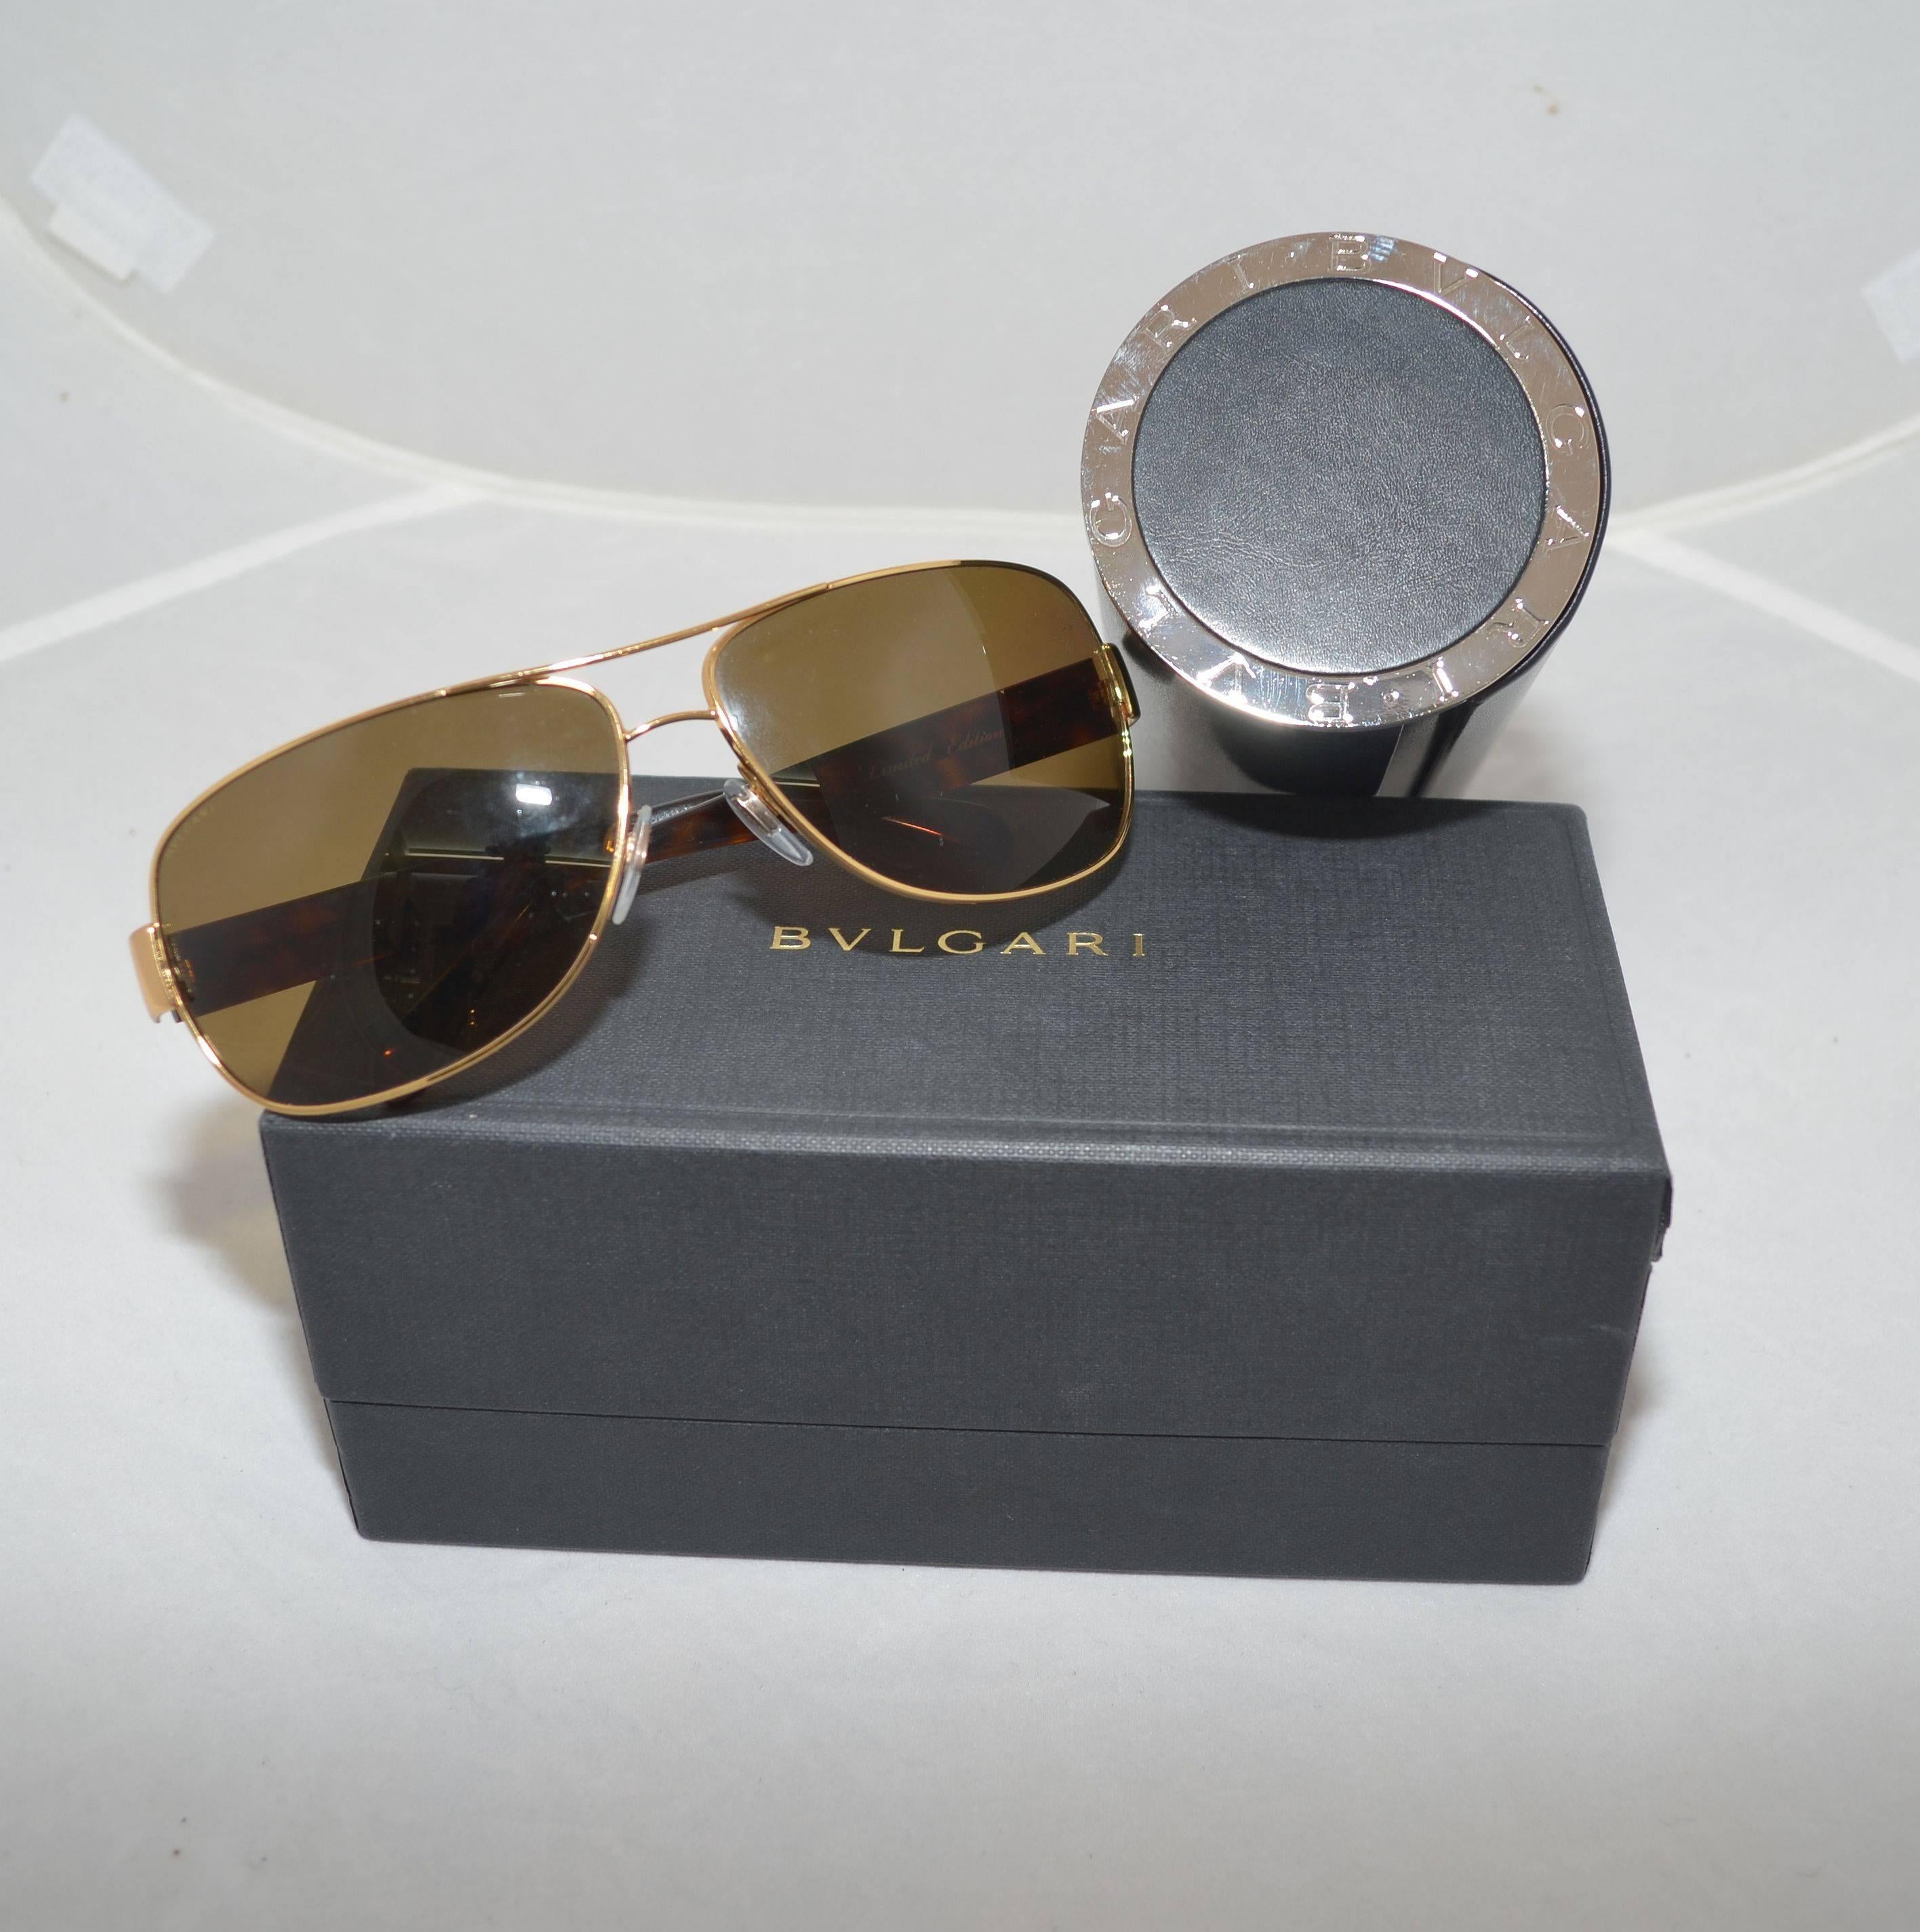 Bvlgari limited edition aviator sunglasses features an 18k gold plated rectangular frame, tortoise brown temples with 'Bvglari' markings, and polarized lenses. Original box and case are included. Made in Italy.